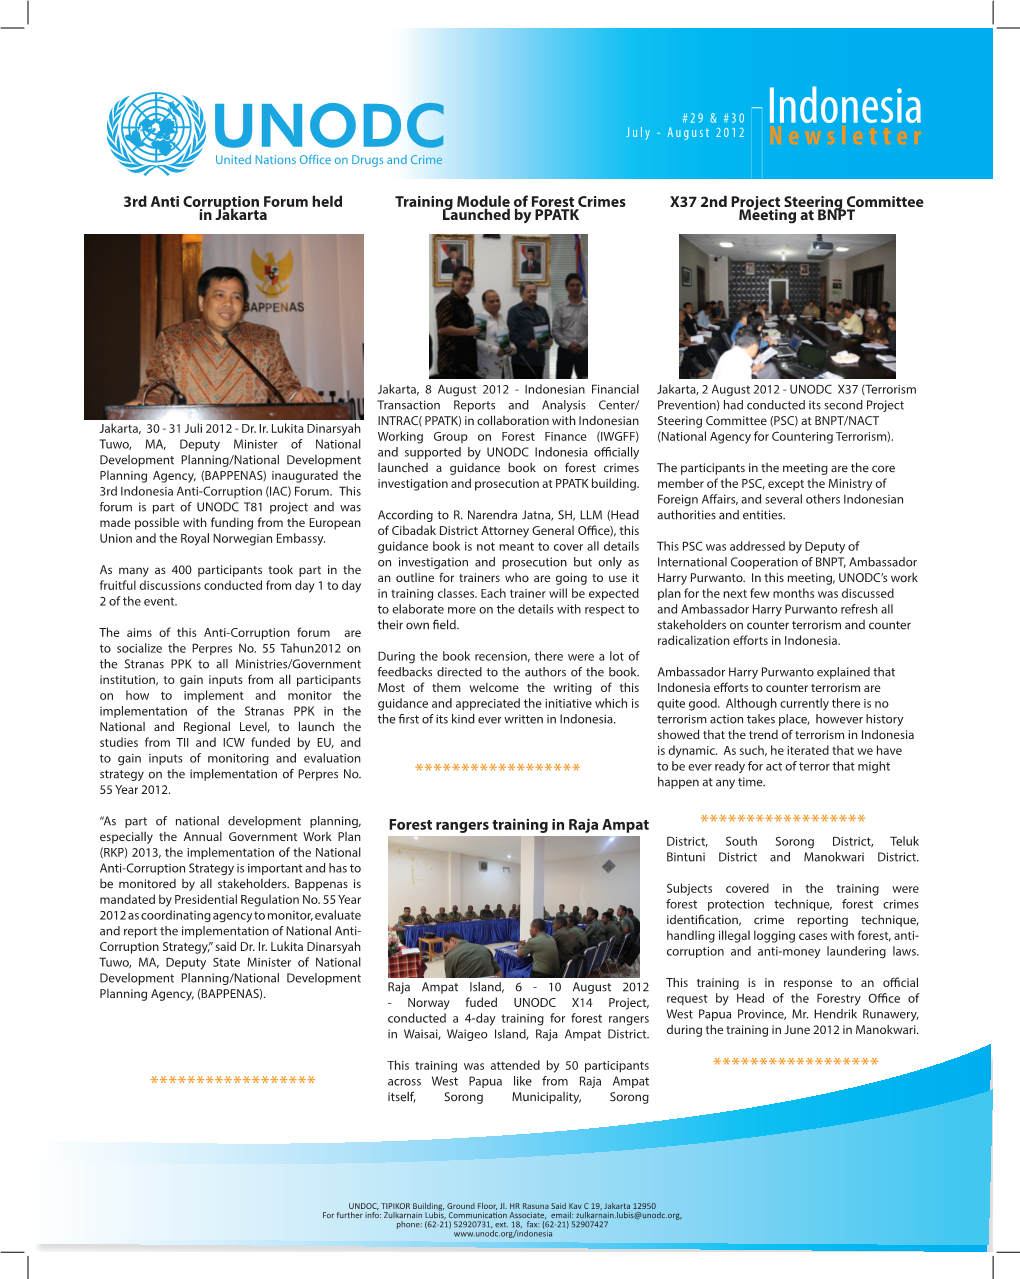 Indonesia July - August 2012 Newsletter